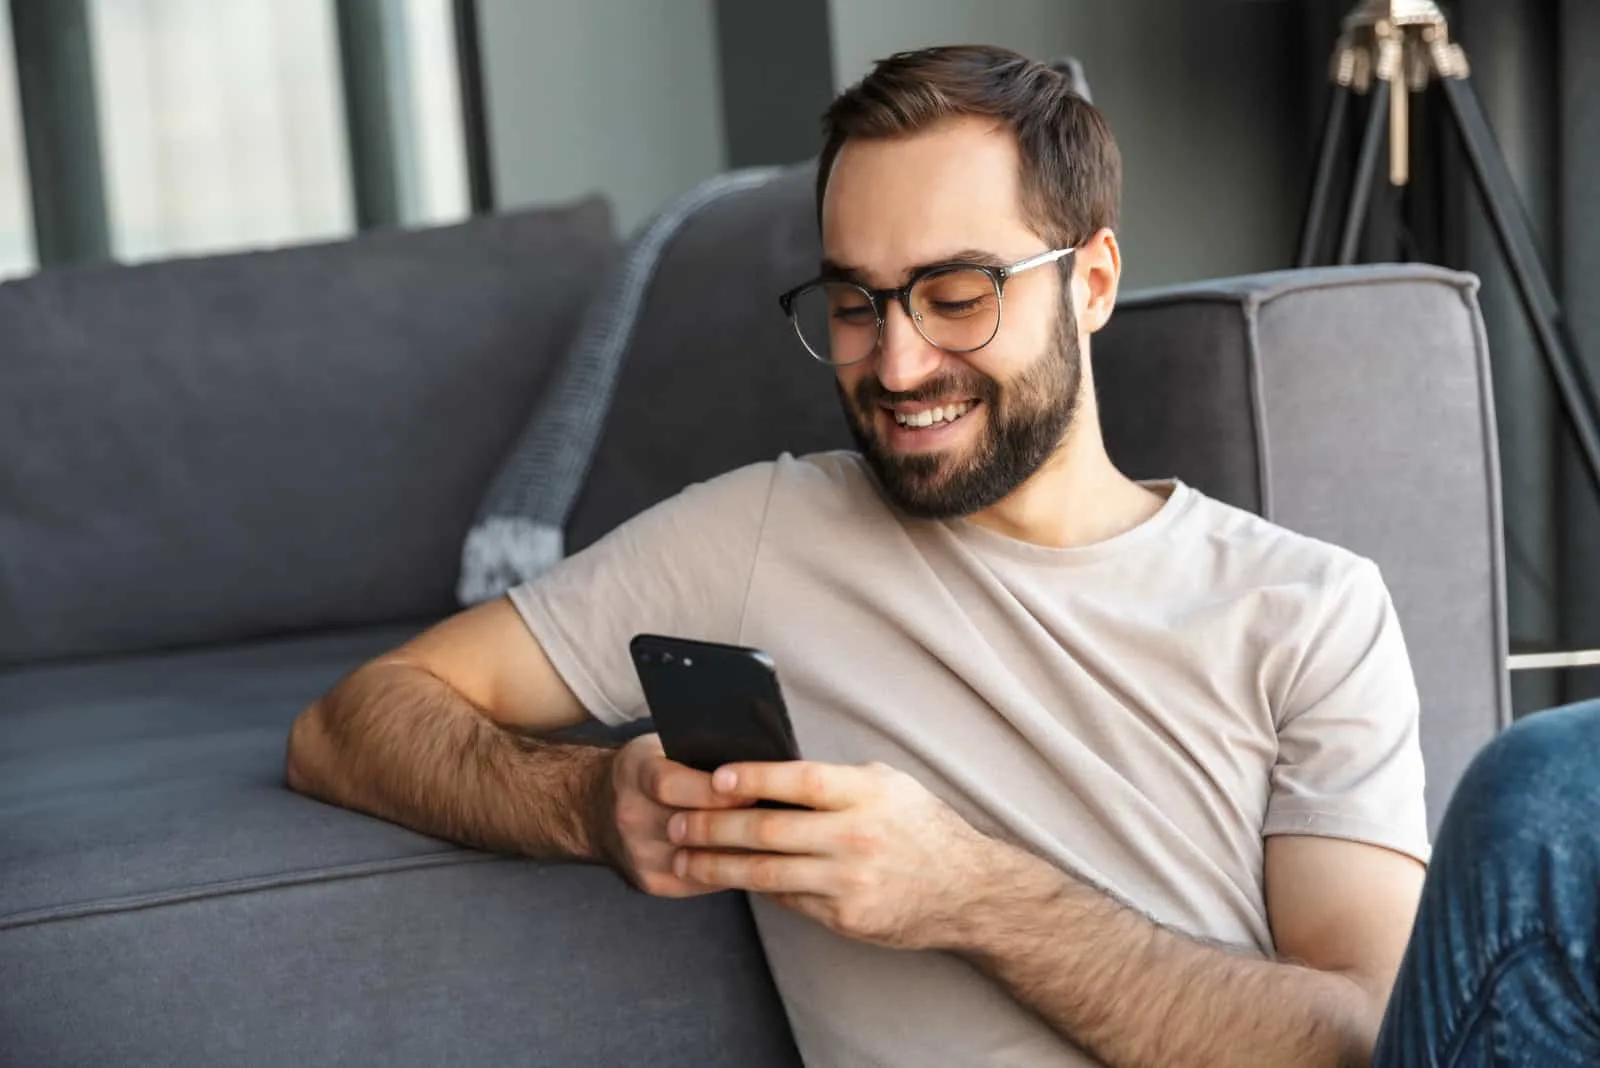 a smiling man sitting on the floor leaning on the couch button on the phone